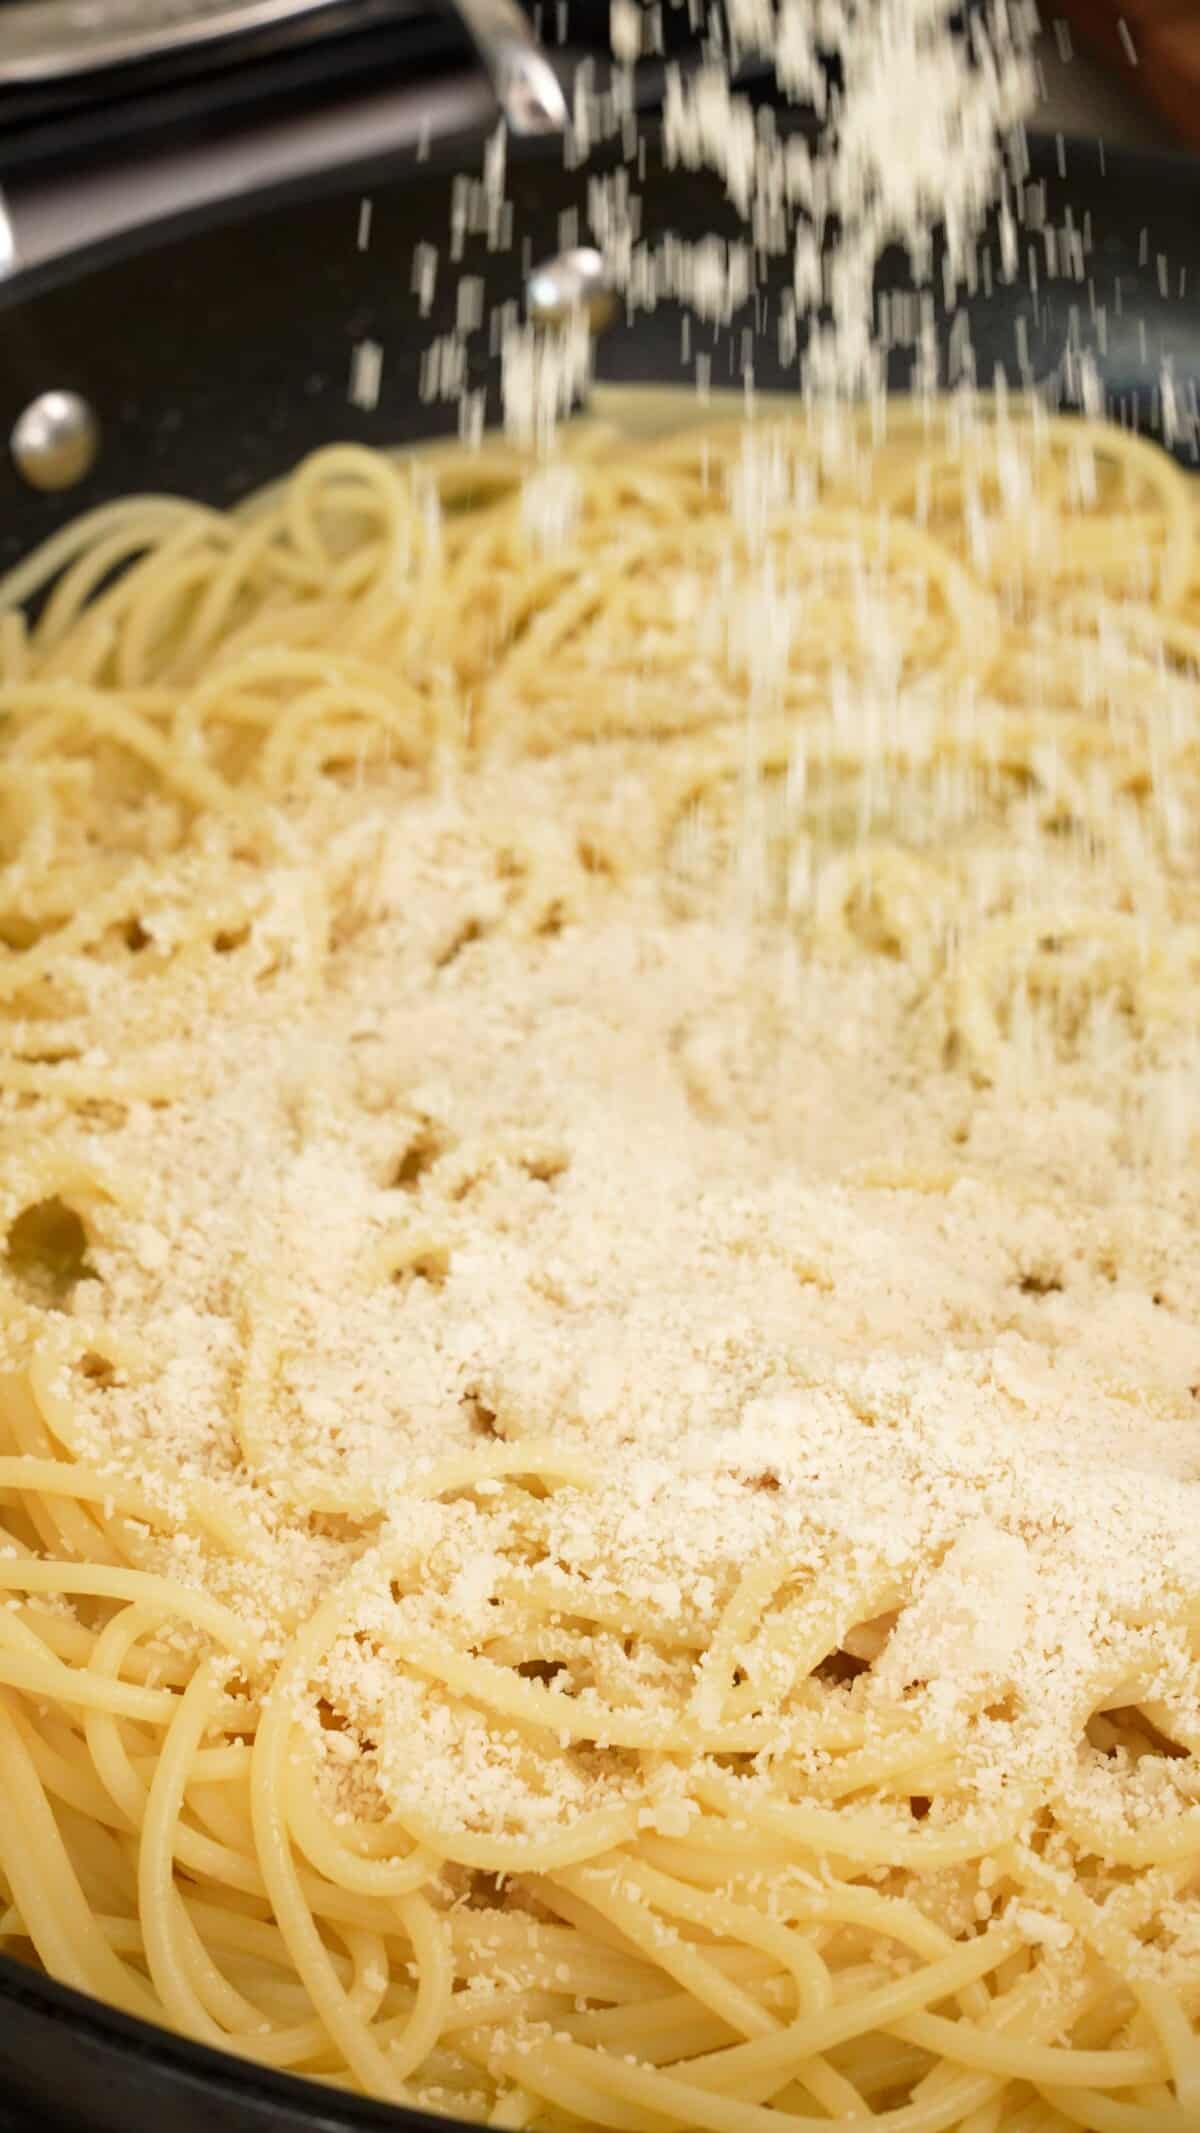 Parmesan cheese being added to pasta in a pan.